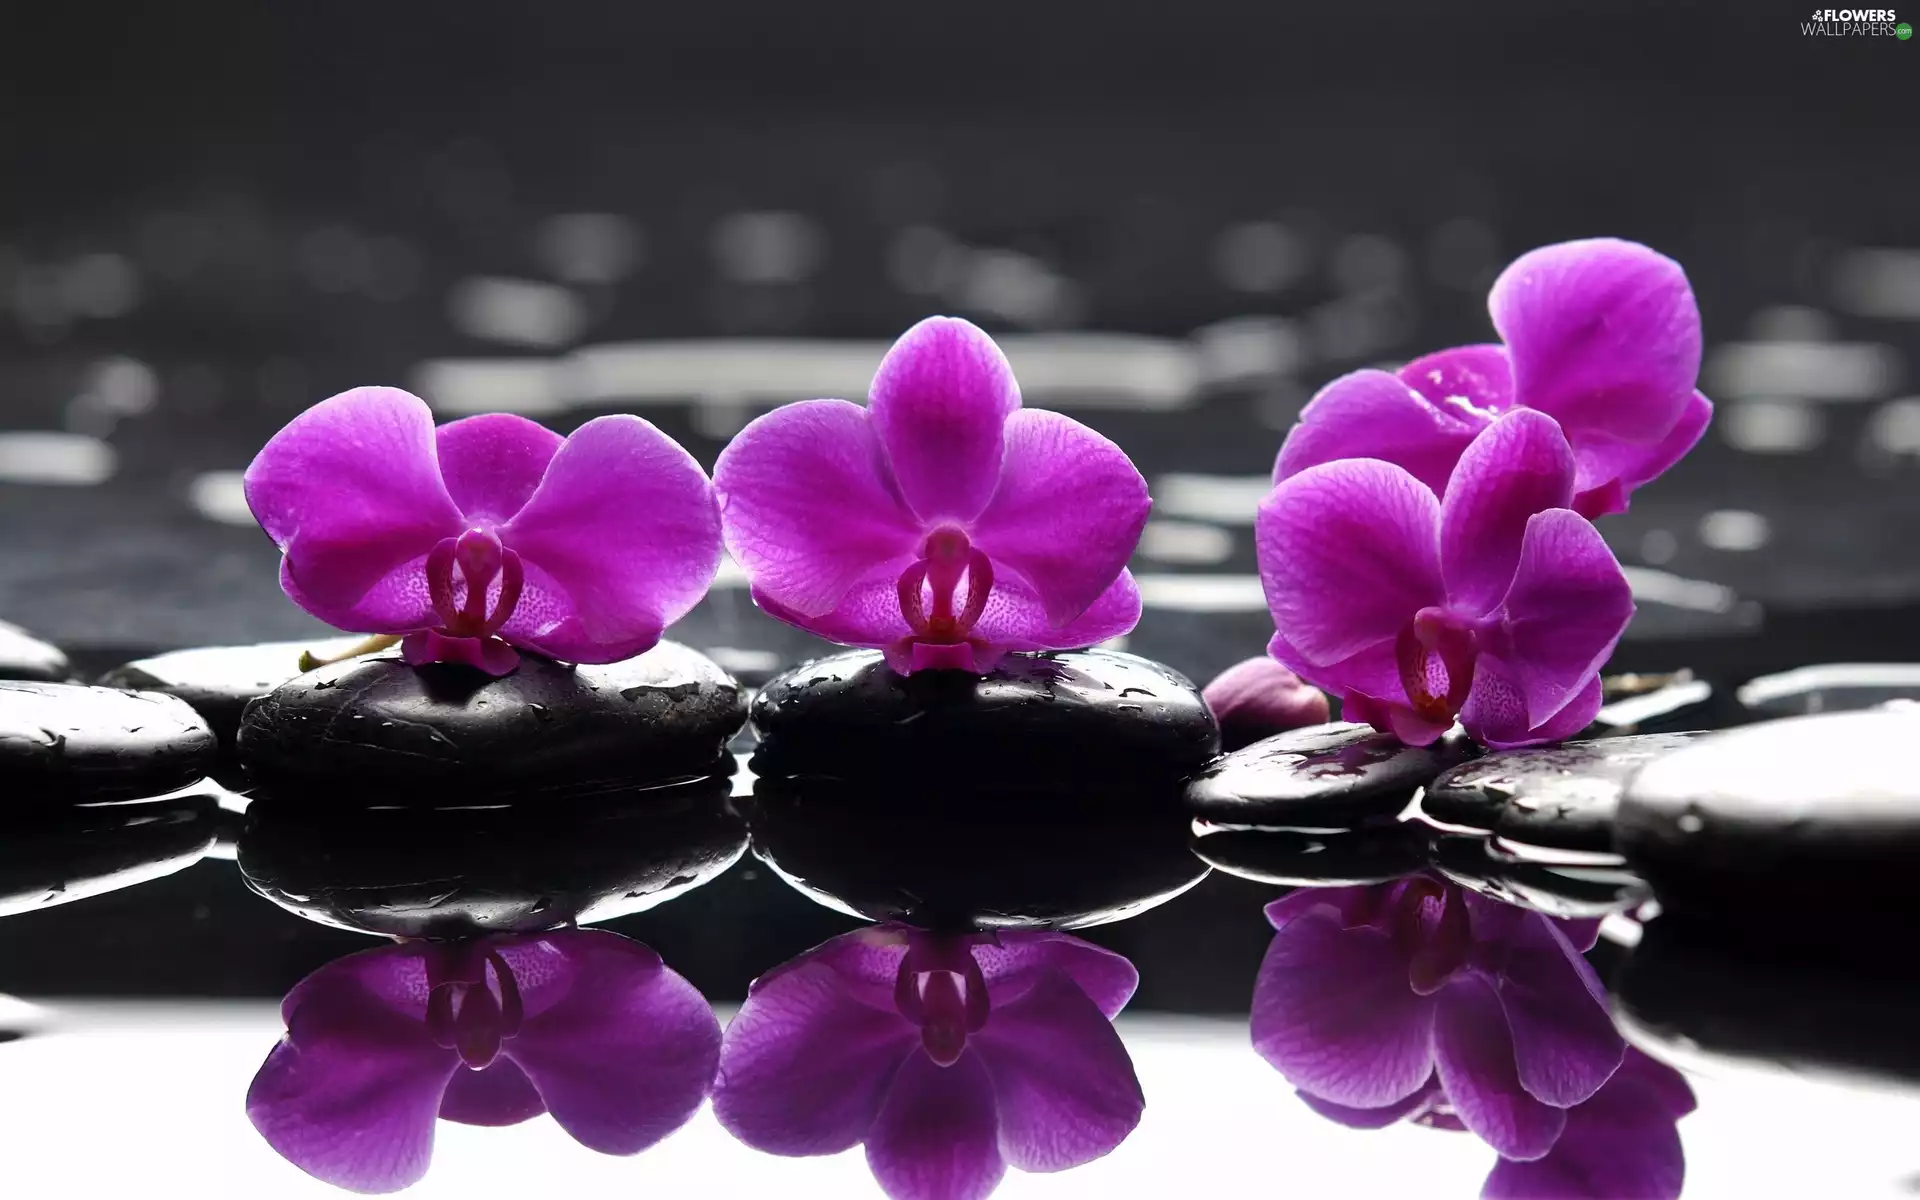 reflection, orchids, water